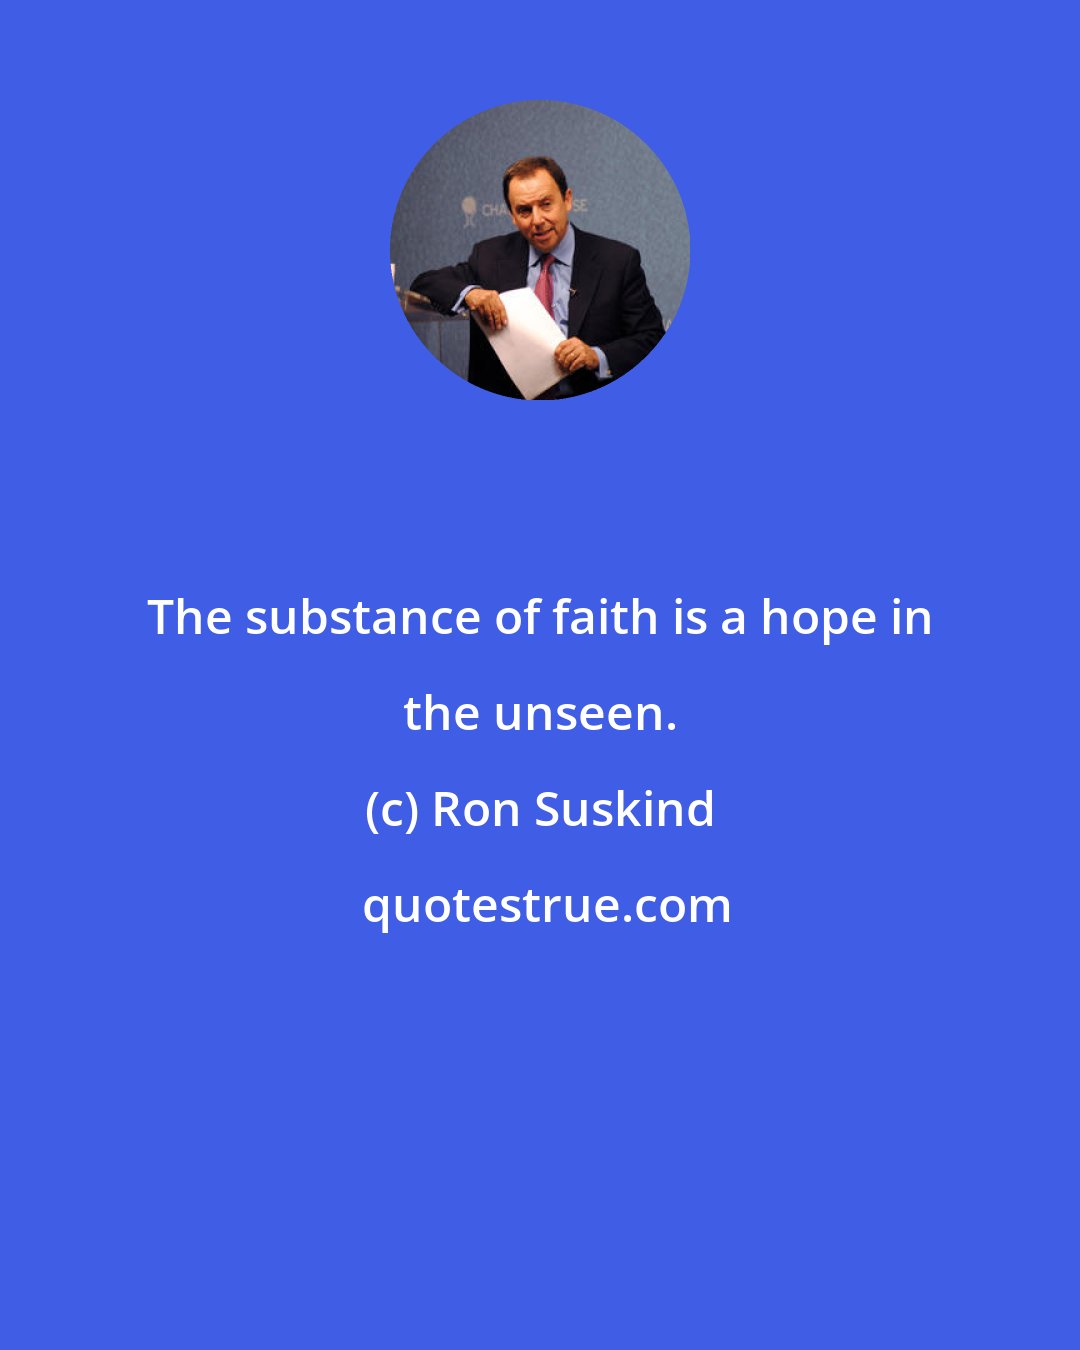 Ron Suskind: The substance of faith is a hope in the unseen.